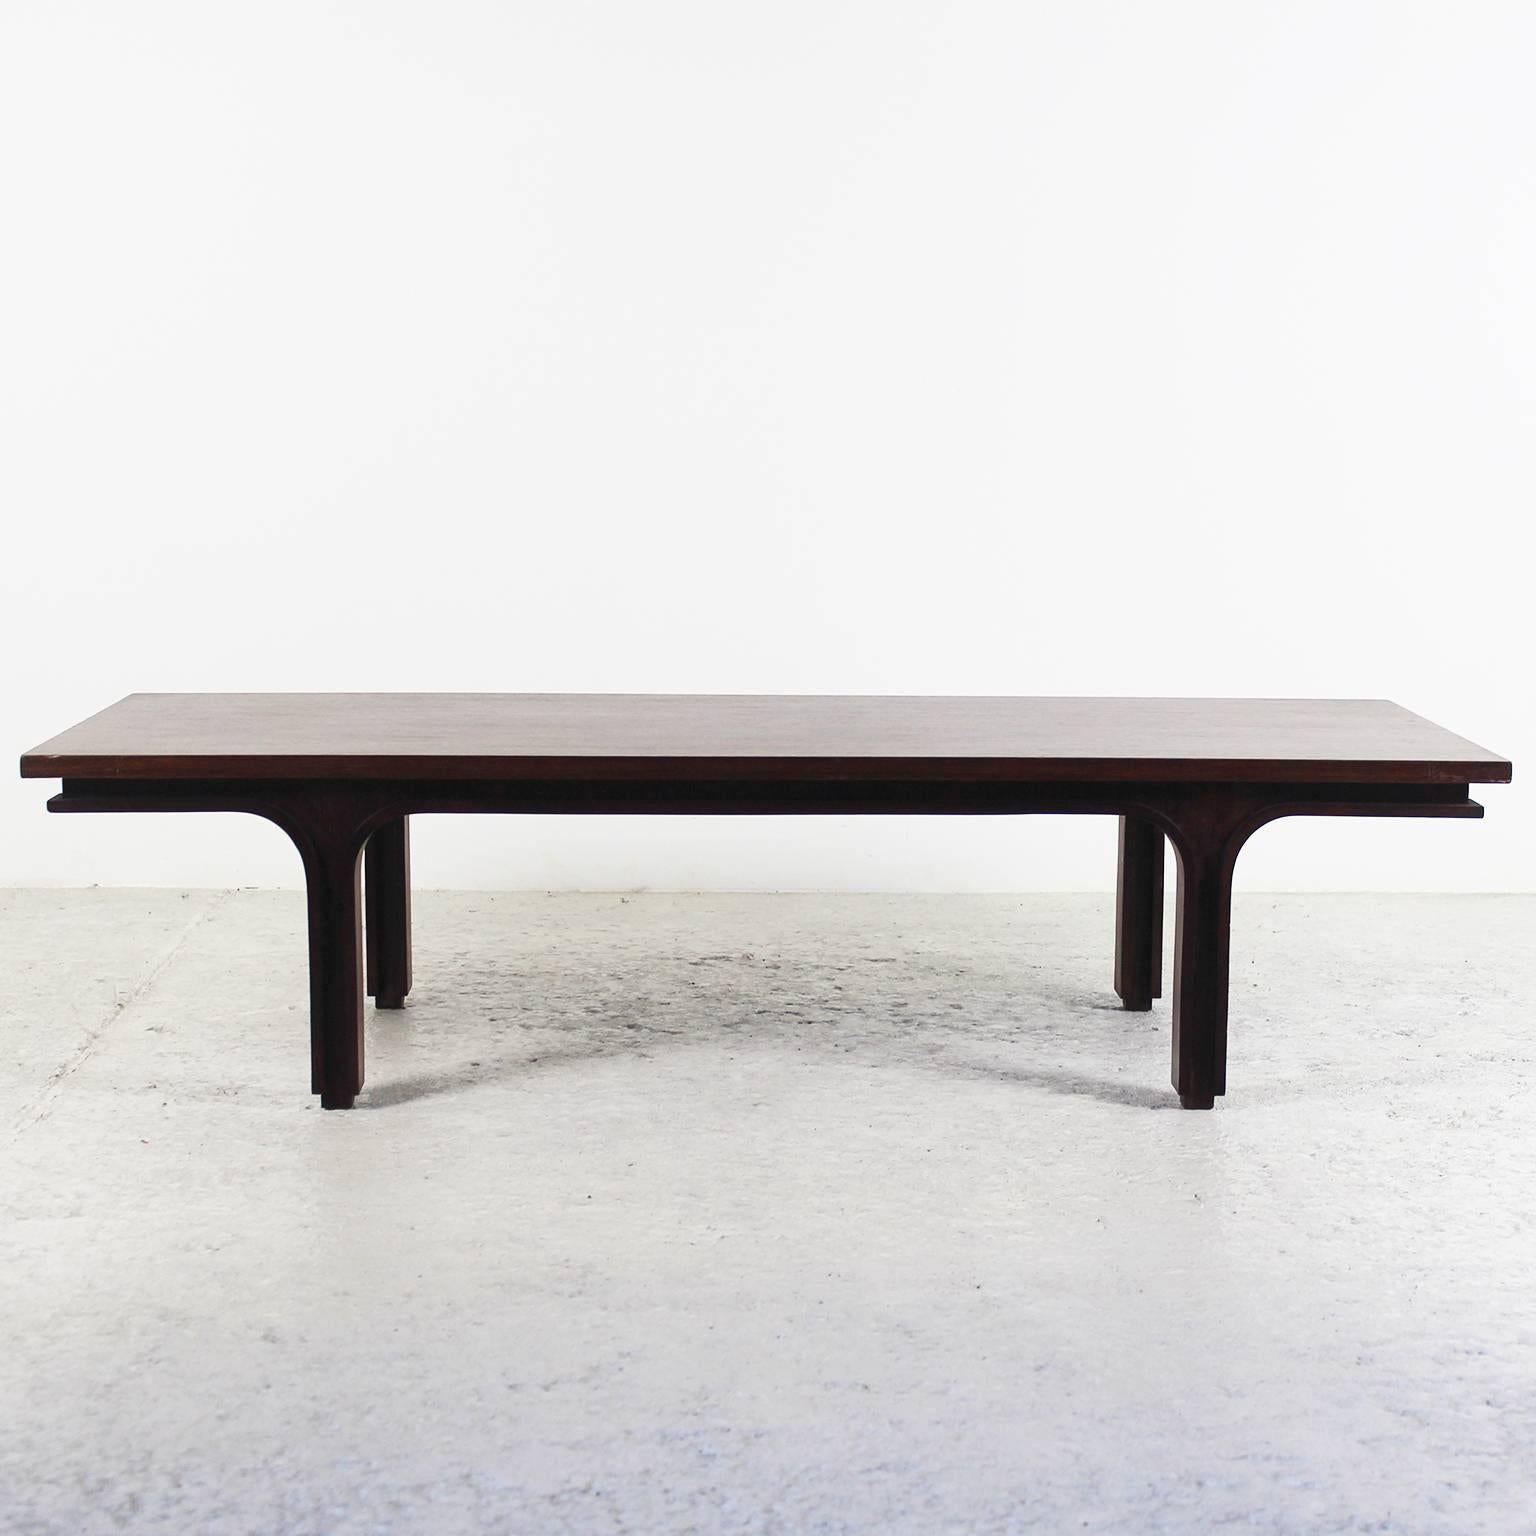 A lovely coffee table or bench in rosewood by the famous designer Gianfranco Frattini for the Italian editor Bernini.